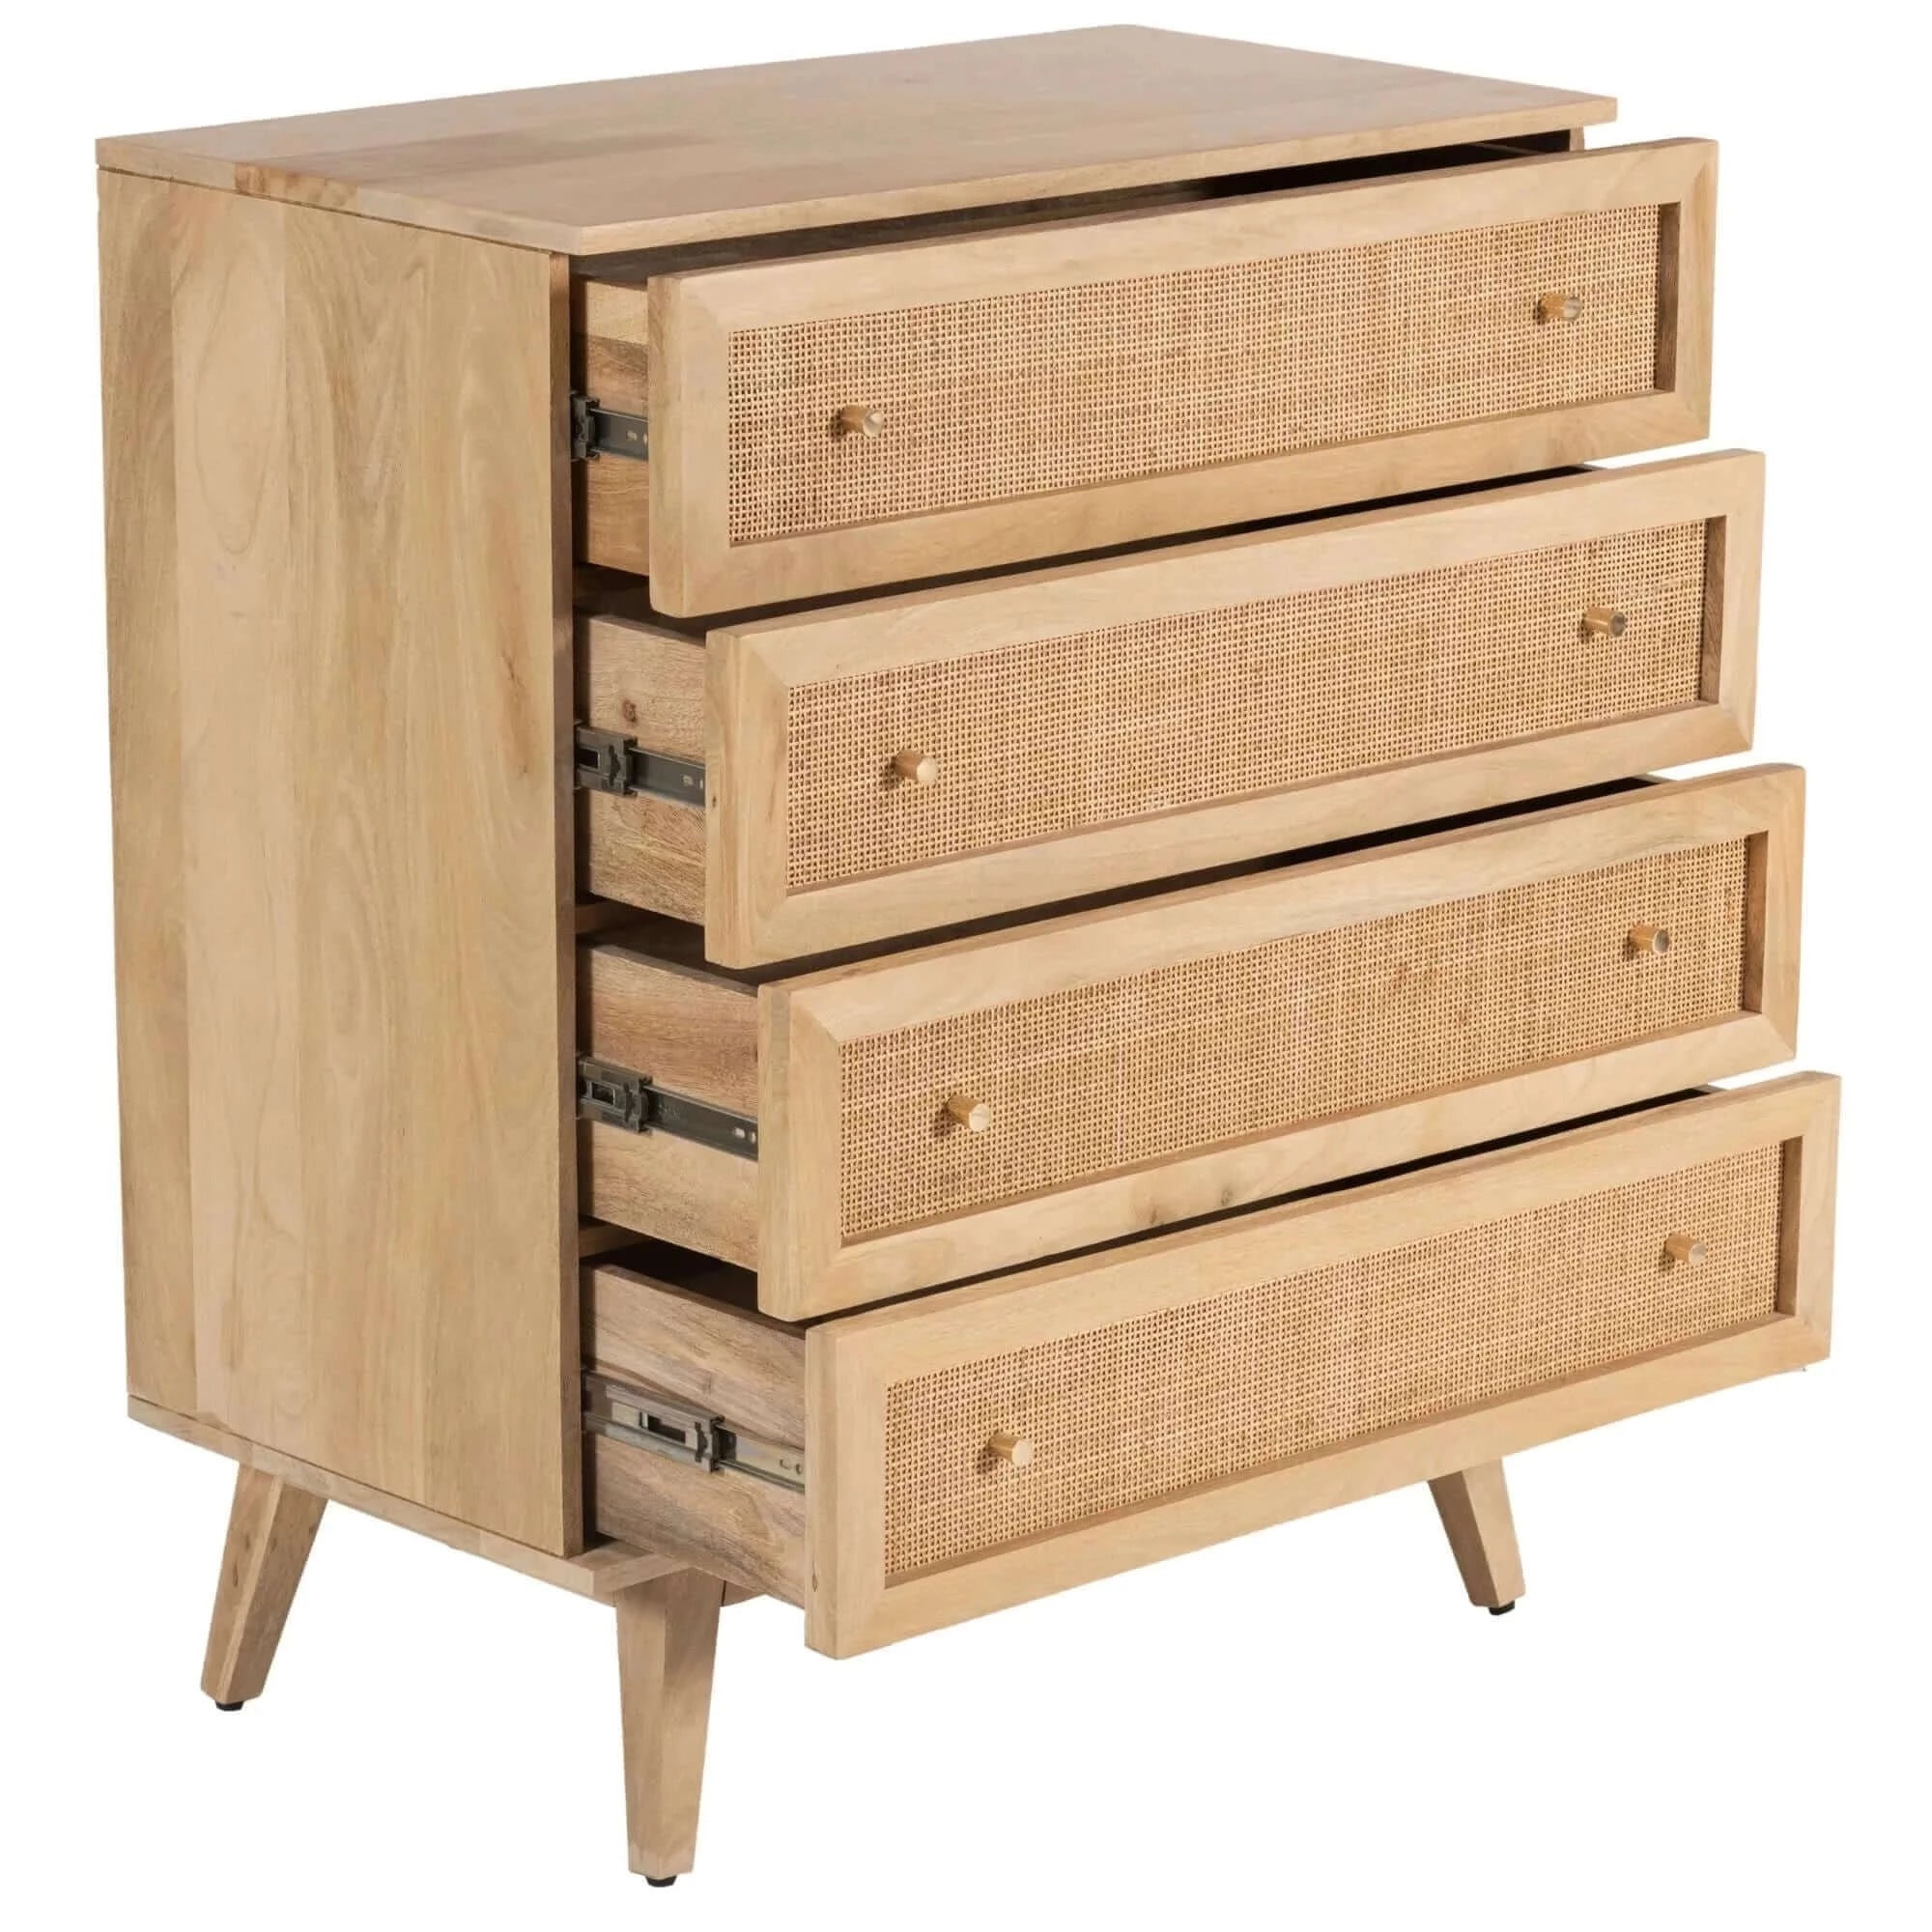 Olearia Storage Cabinet Buffet Chest of 4 Drawer Mango Wood Rattan Natural-Upinteriors